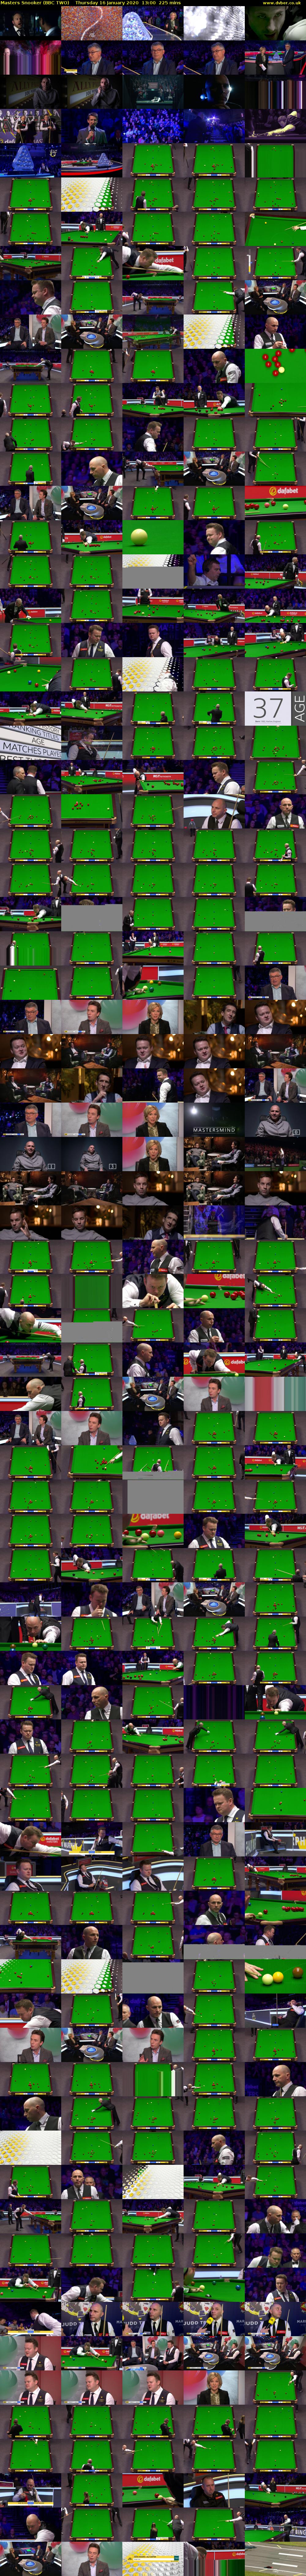 Masters Snooker (BBC TWO) Thursday 16 January 2020 13:00 - 16:45